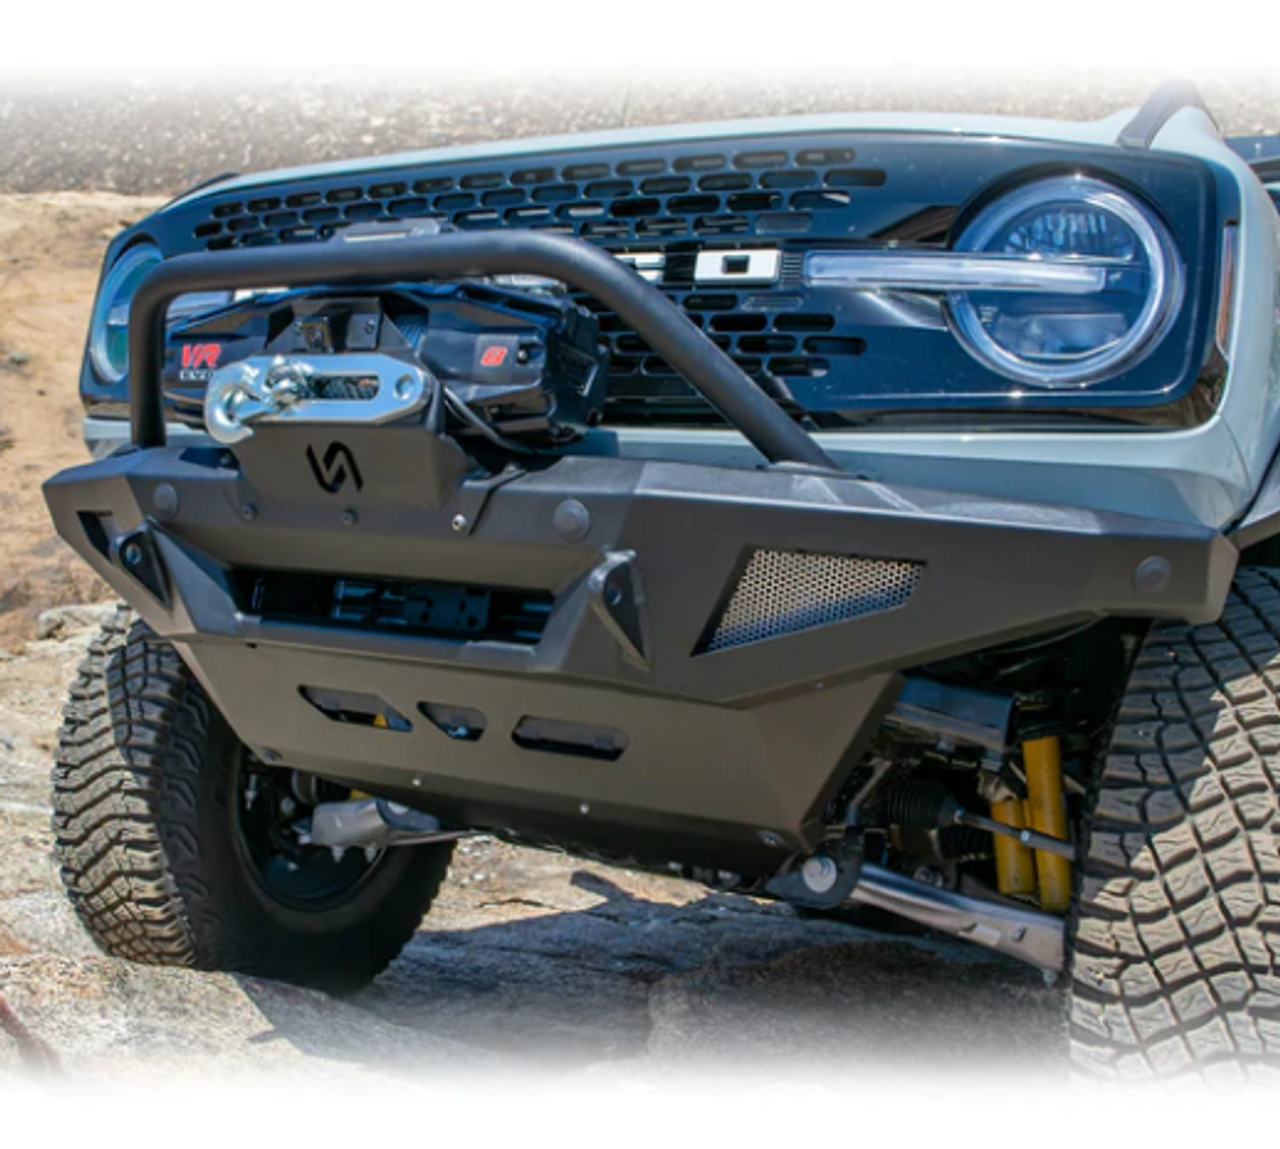 Turn Offroad FB1-M1P Front Bumper, Skid Plate, Winch Mount, Bull Bar Package for Ford Bronco 2021+